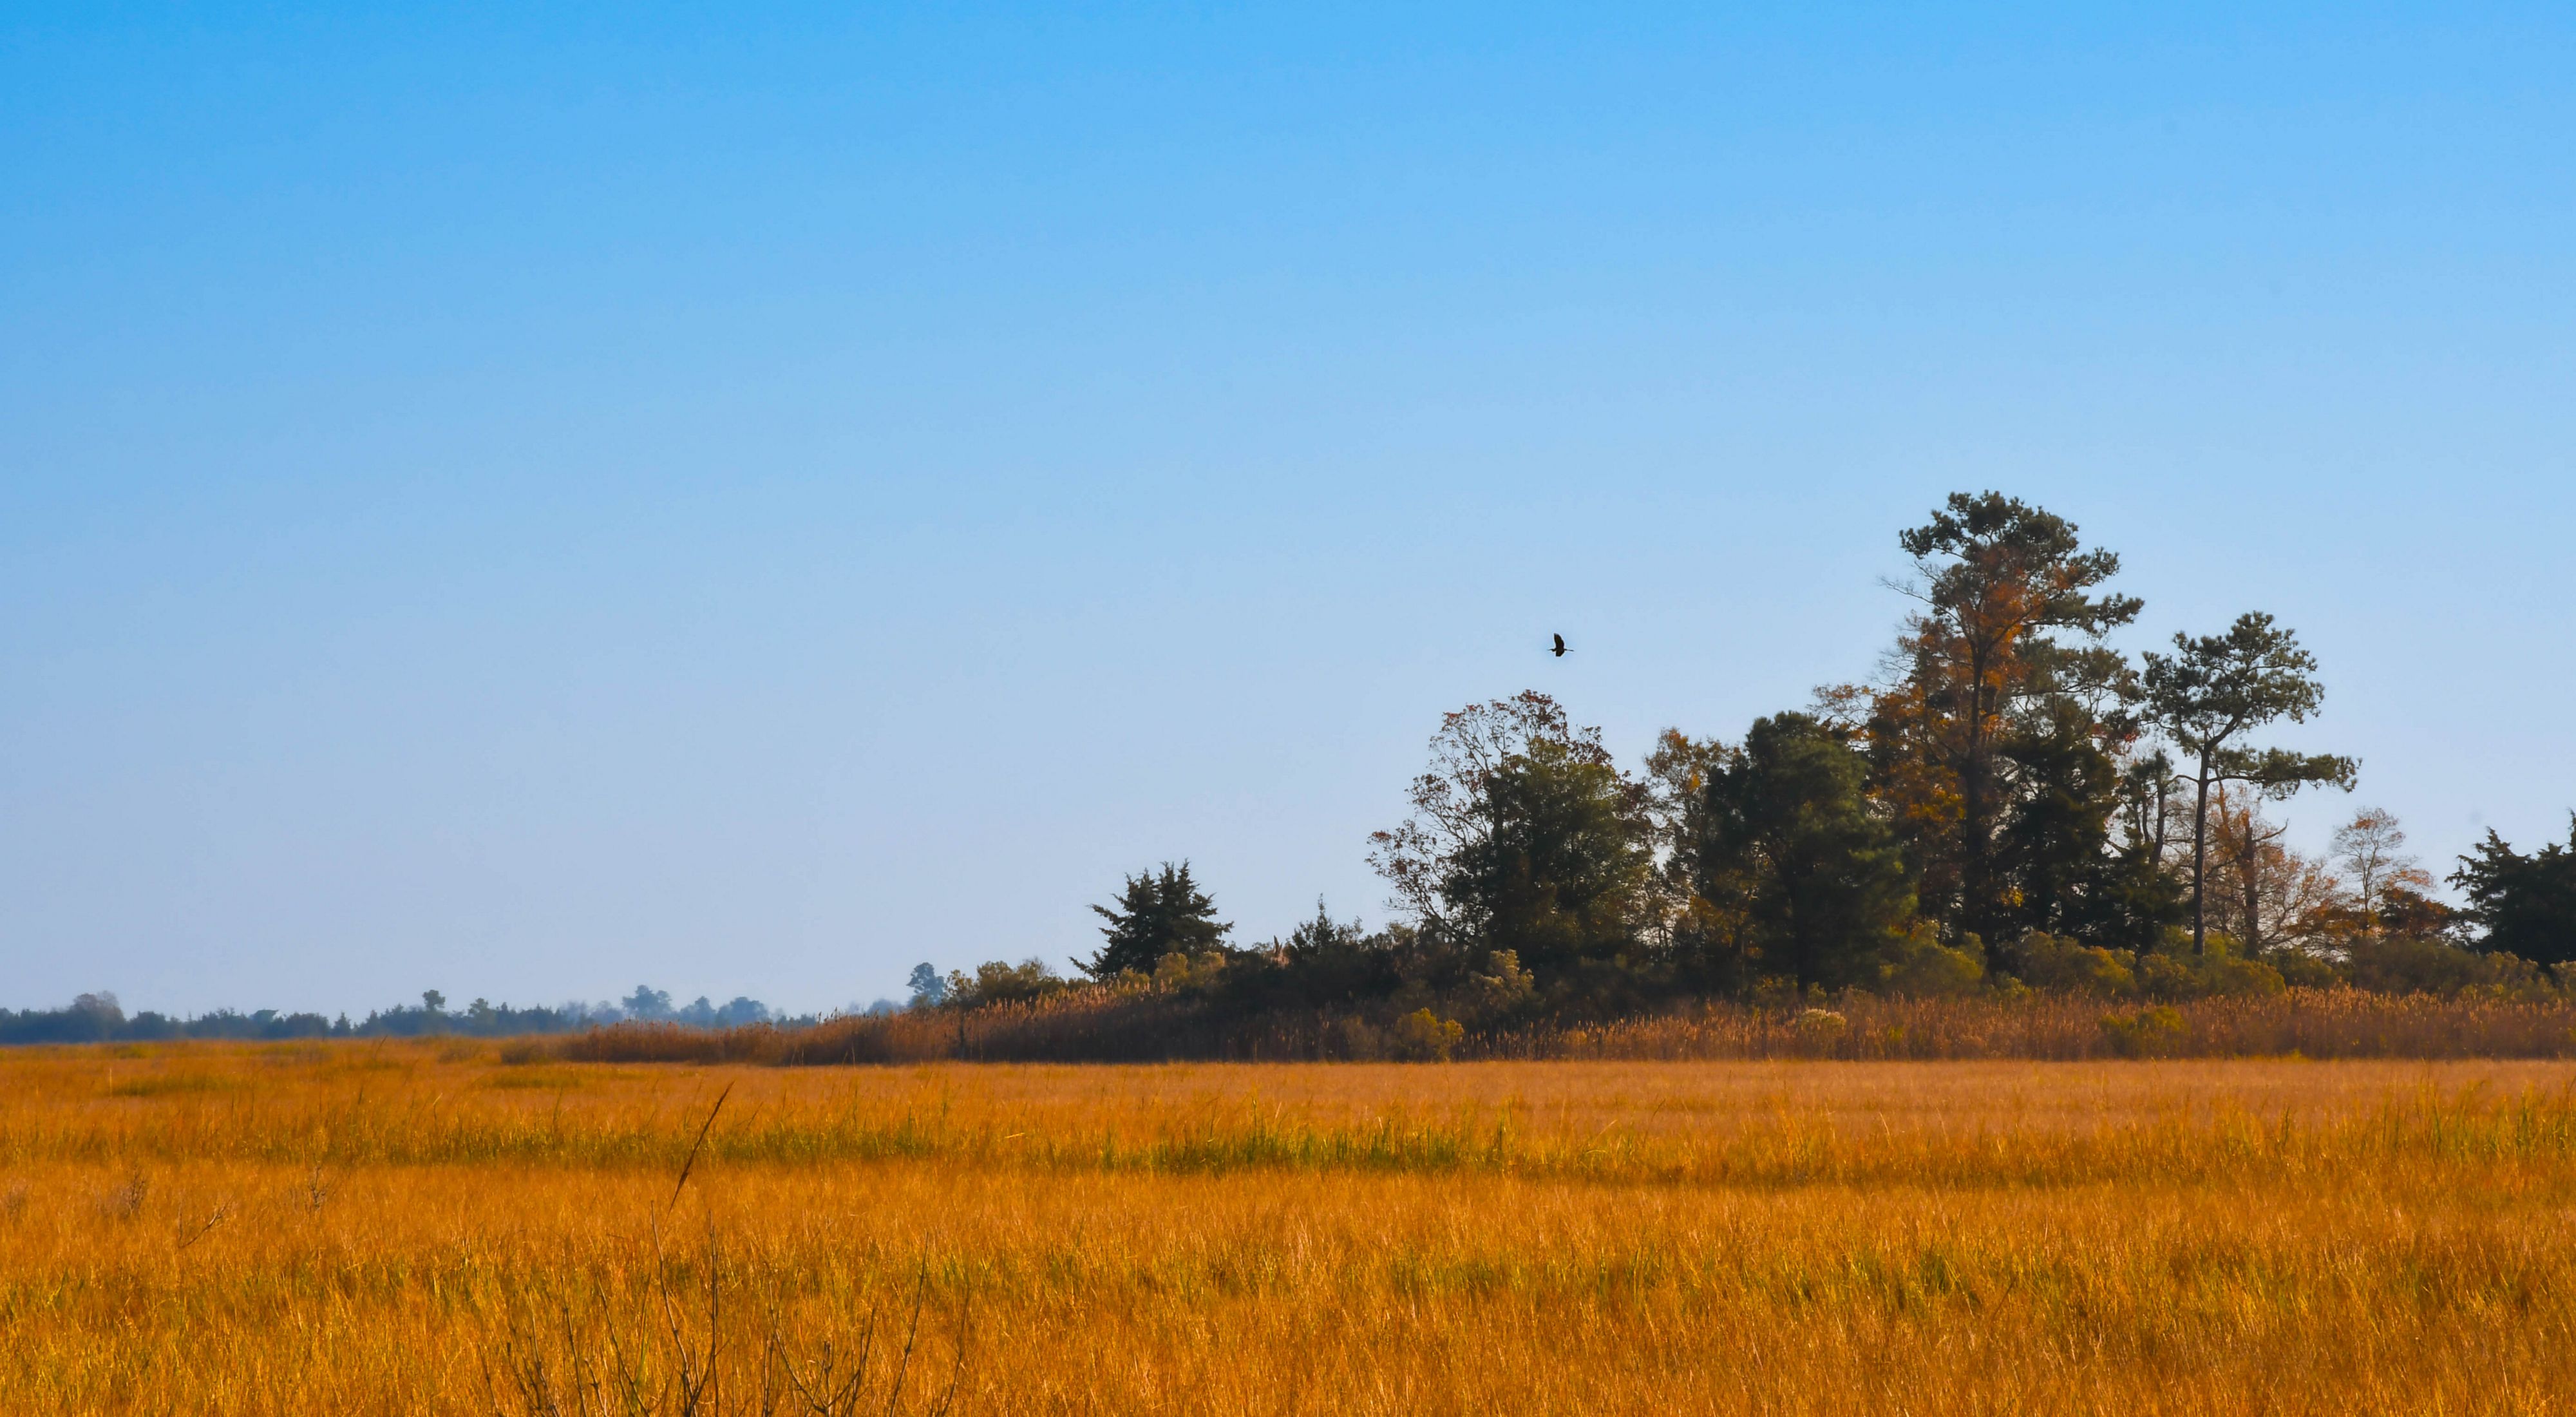 Landscape view of golden grasses in a wetland.